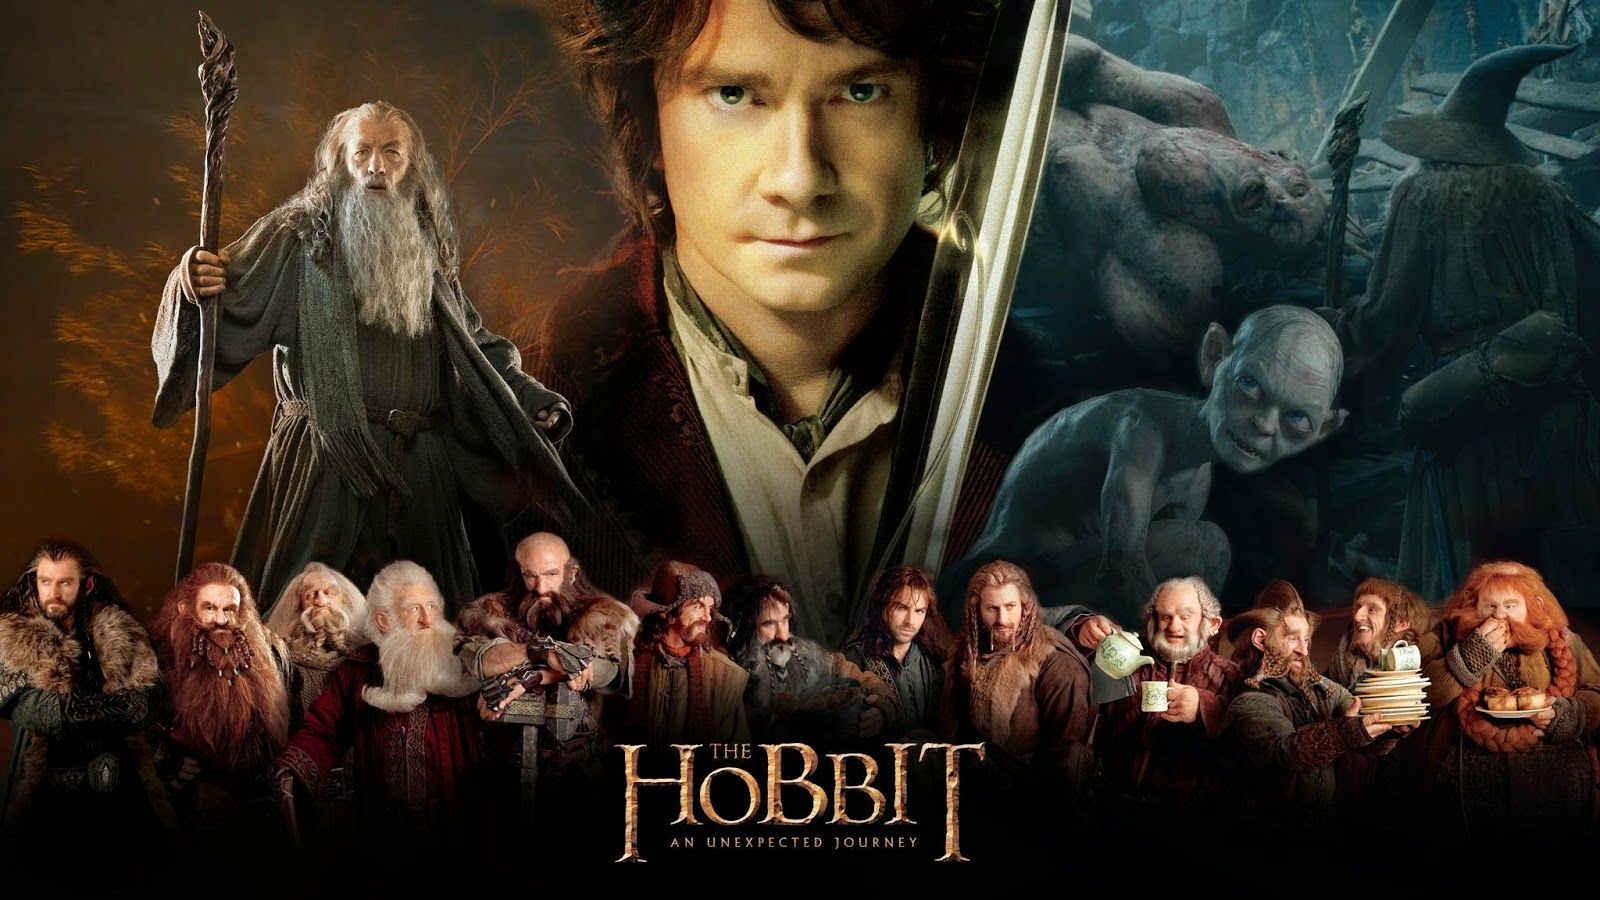 Review: The Hobbit: An Unexpected Journey (2012) – more movies